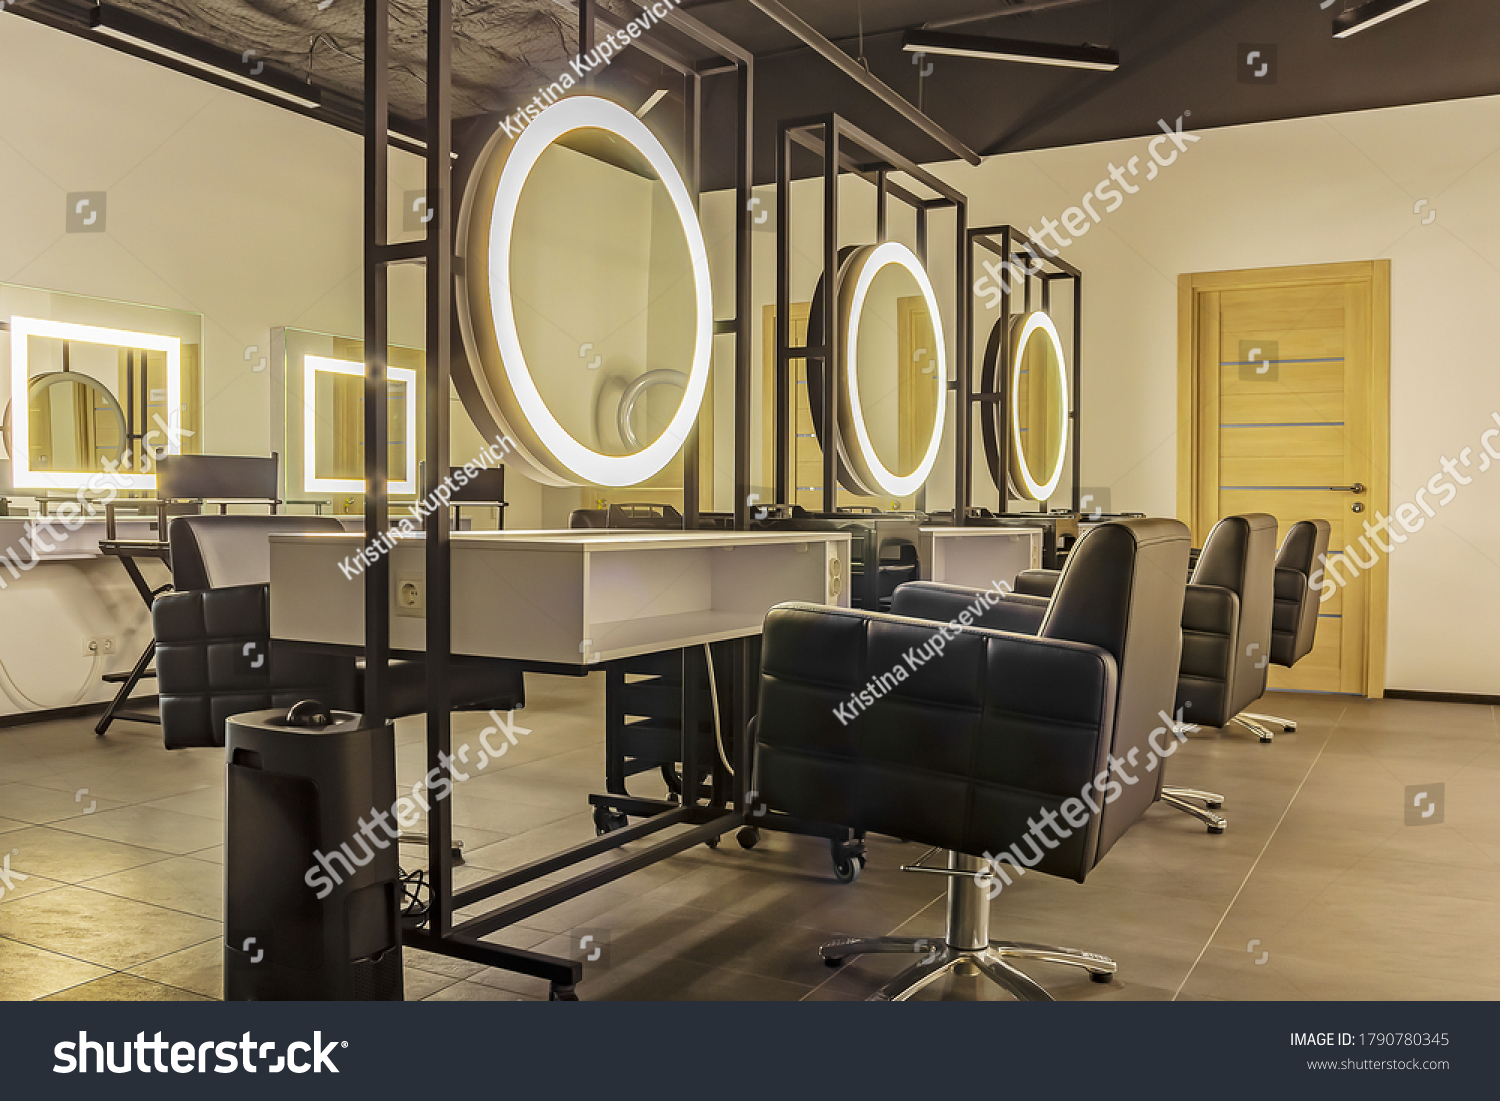 Premium coworking center for hair masters: workplace of the hairdresser with illuminated mirrors and comfortable chairs. Concept of contemporary interior design for hairdresser. Horizontal orientation #1790780345